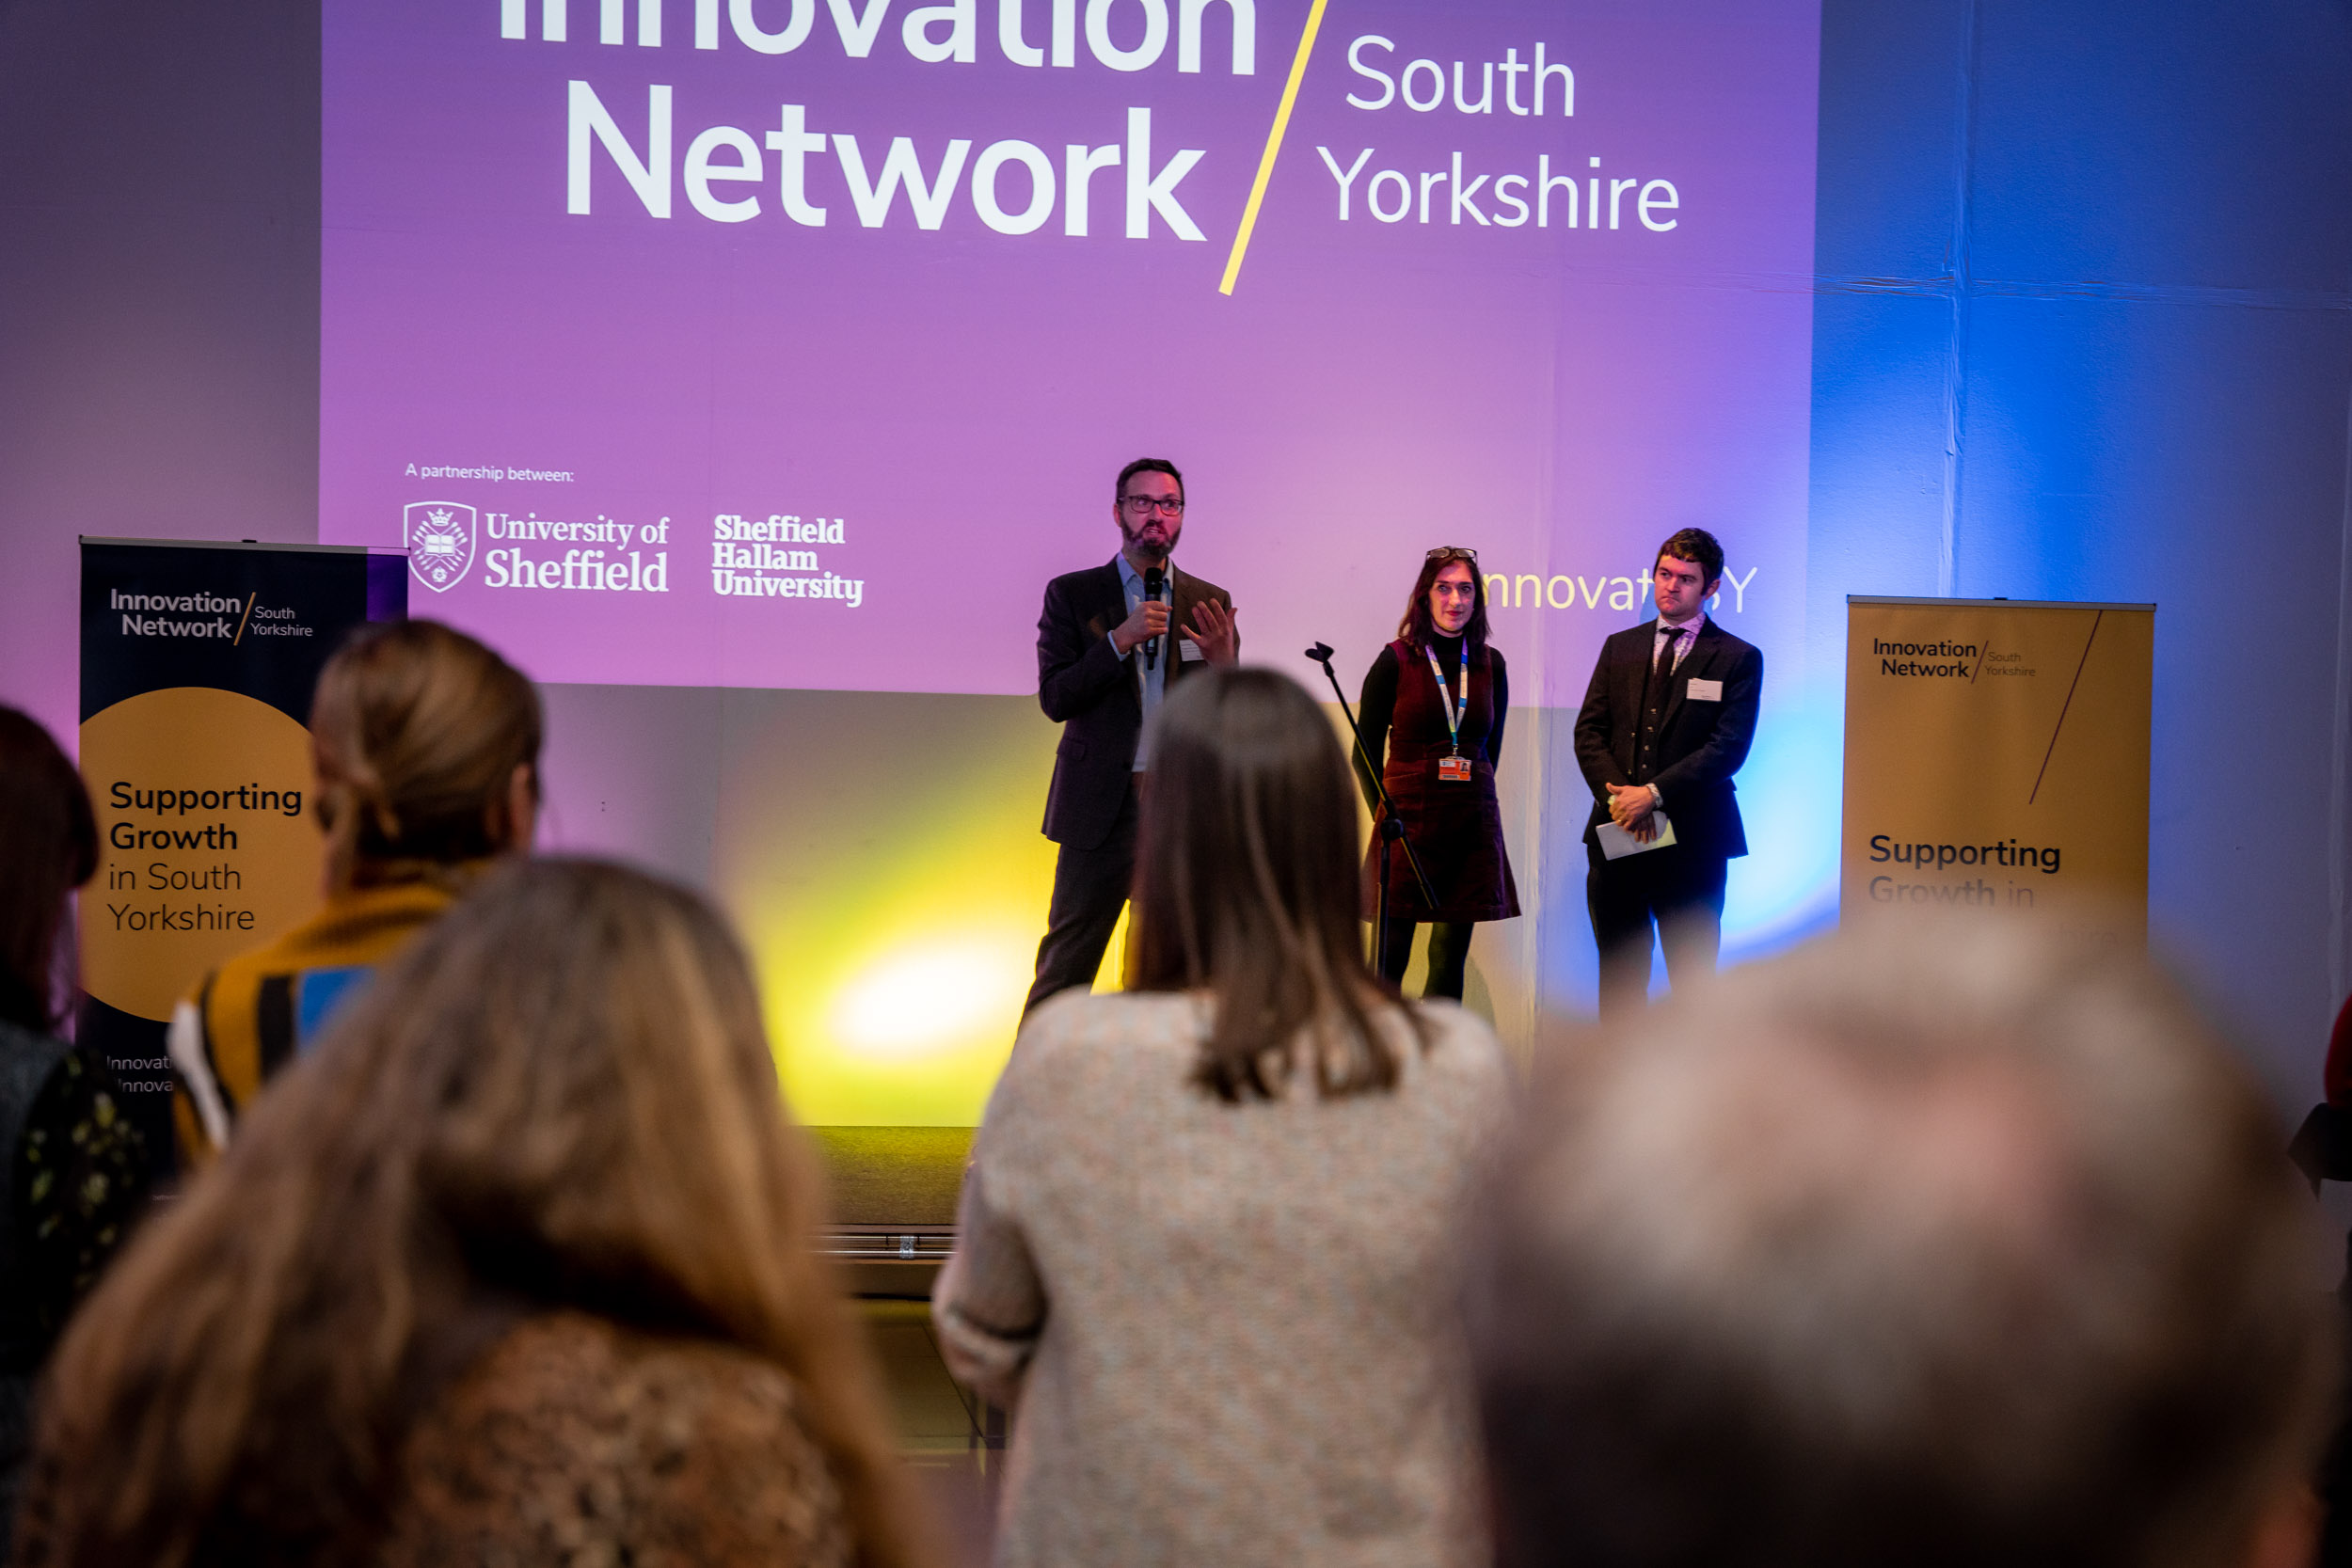 Sheffield Universities launch Innovation Network to boost South Yorkshire’s growth